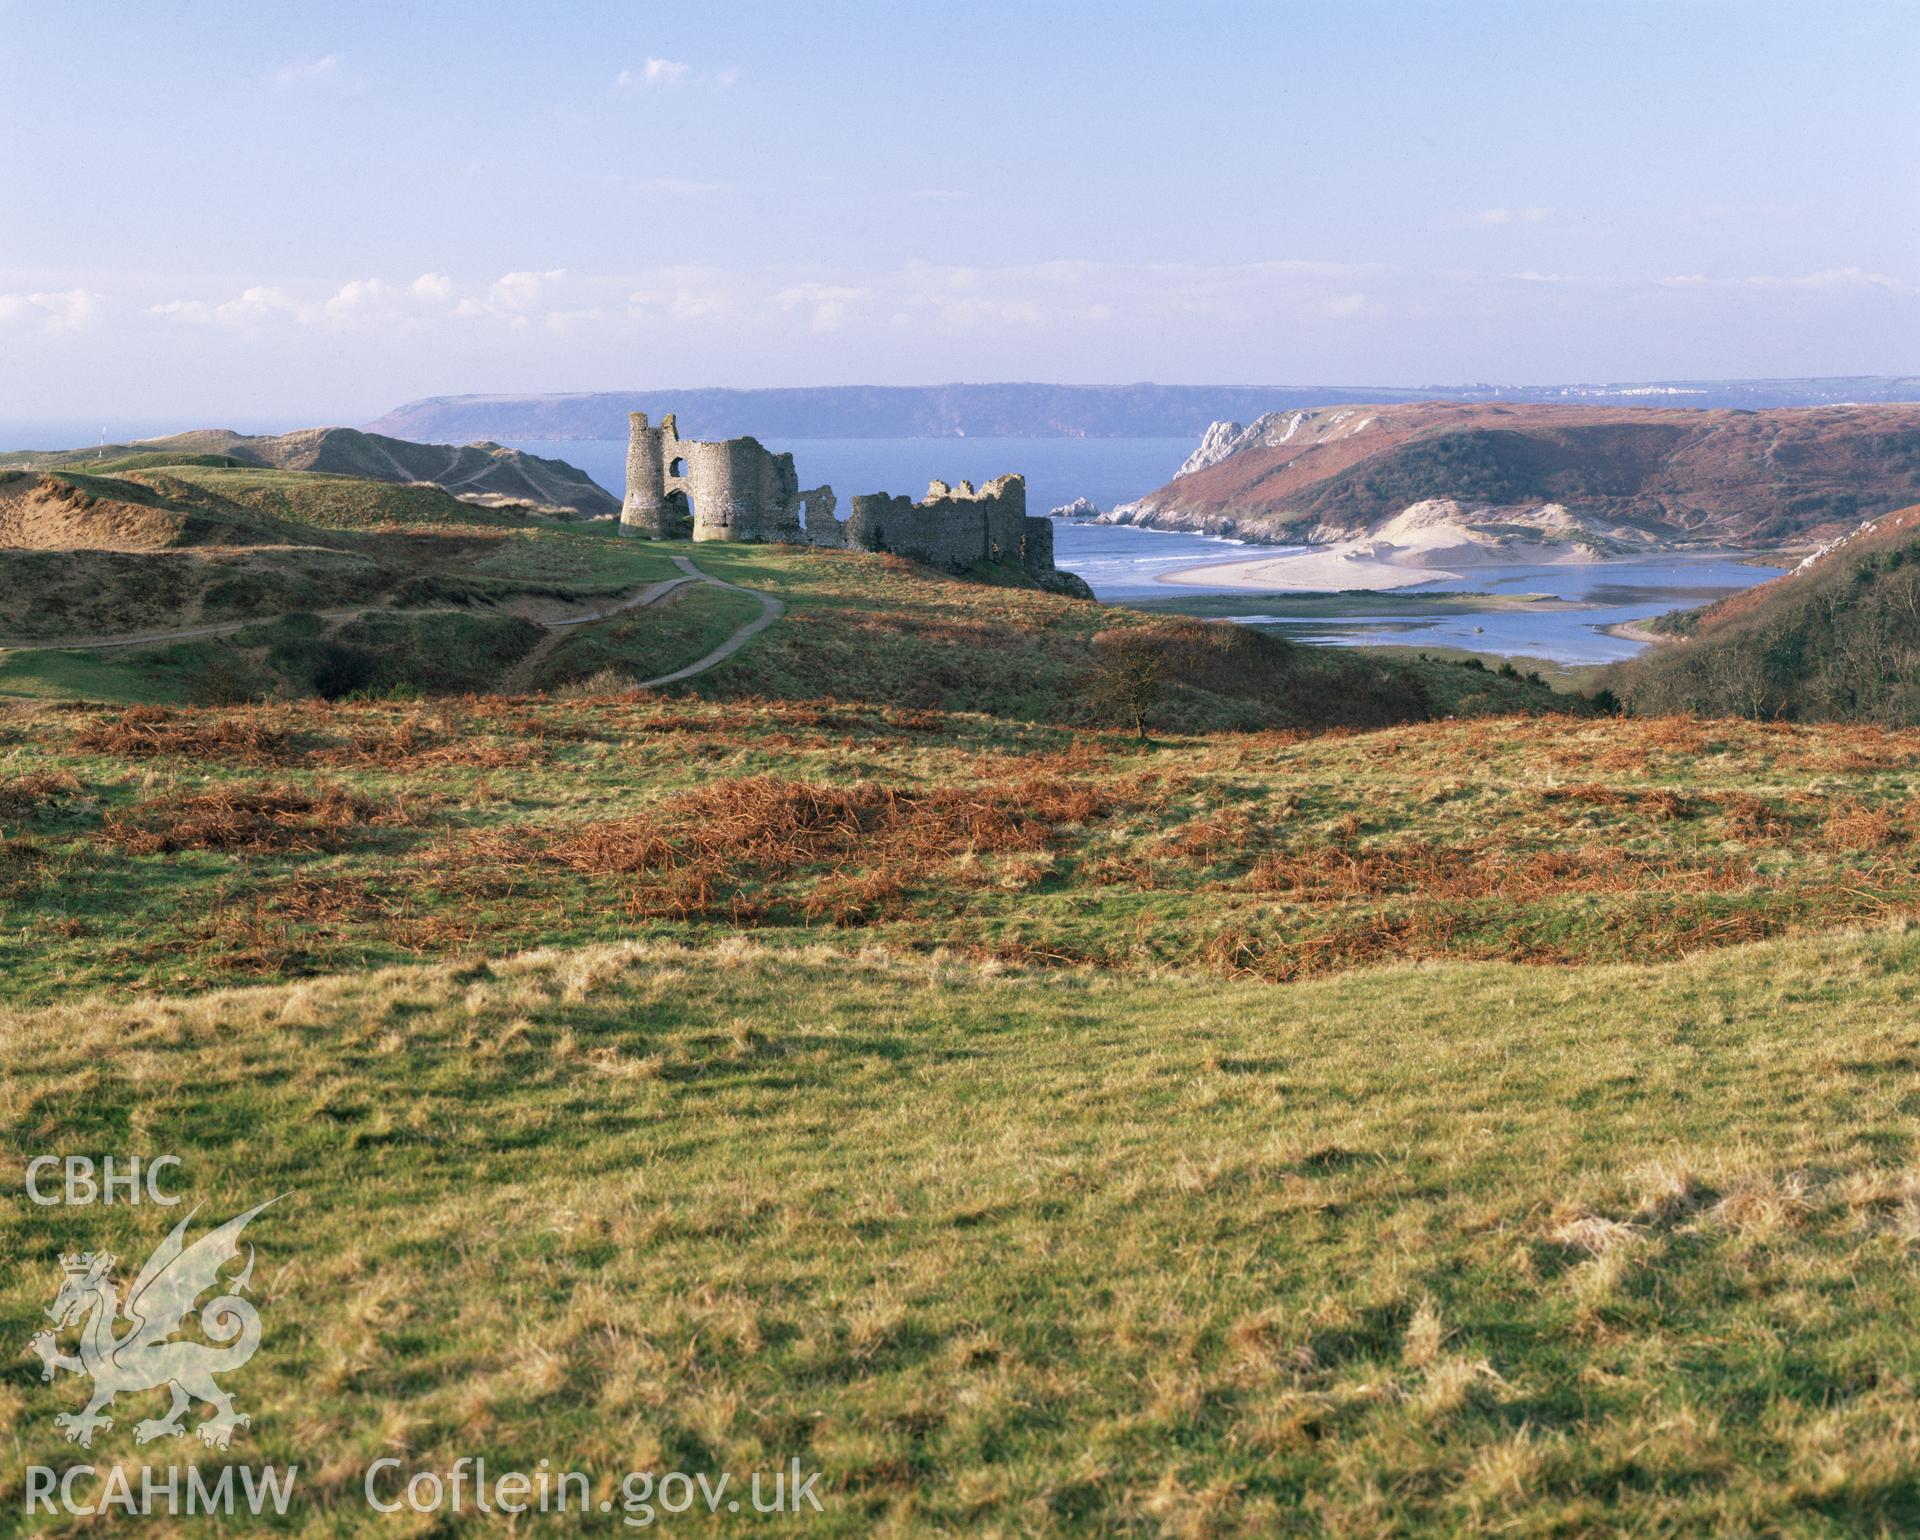 RCAHMW colour transparency showing view of Pennard Castle, taken by Iain Wright, c.1991